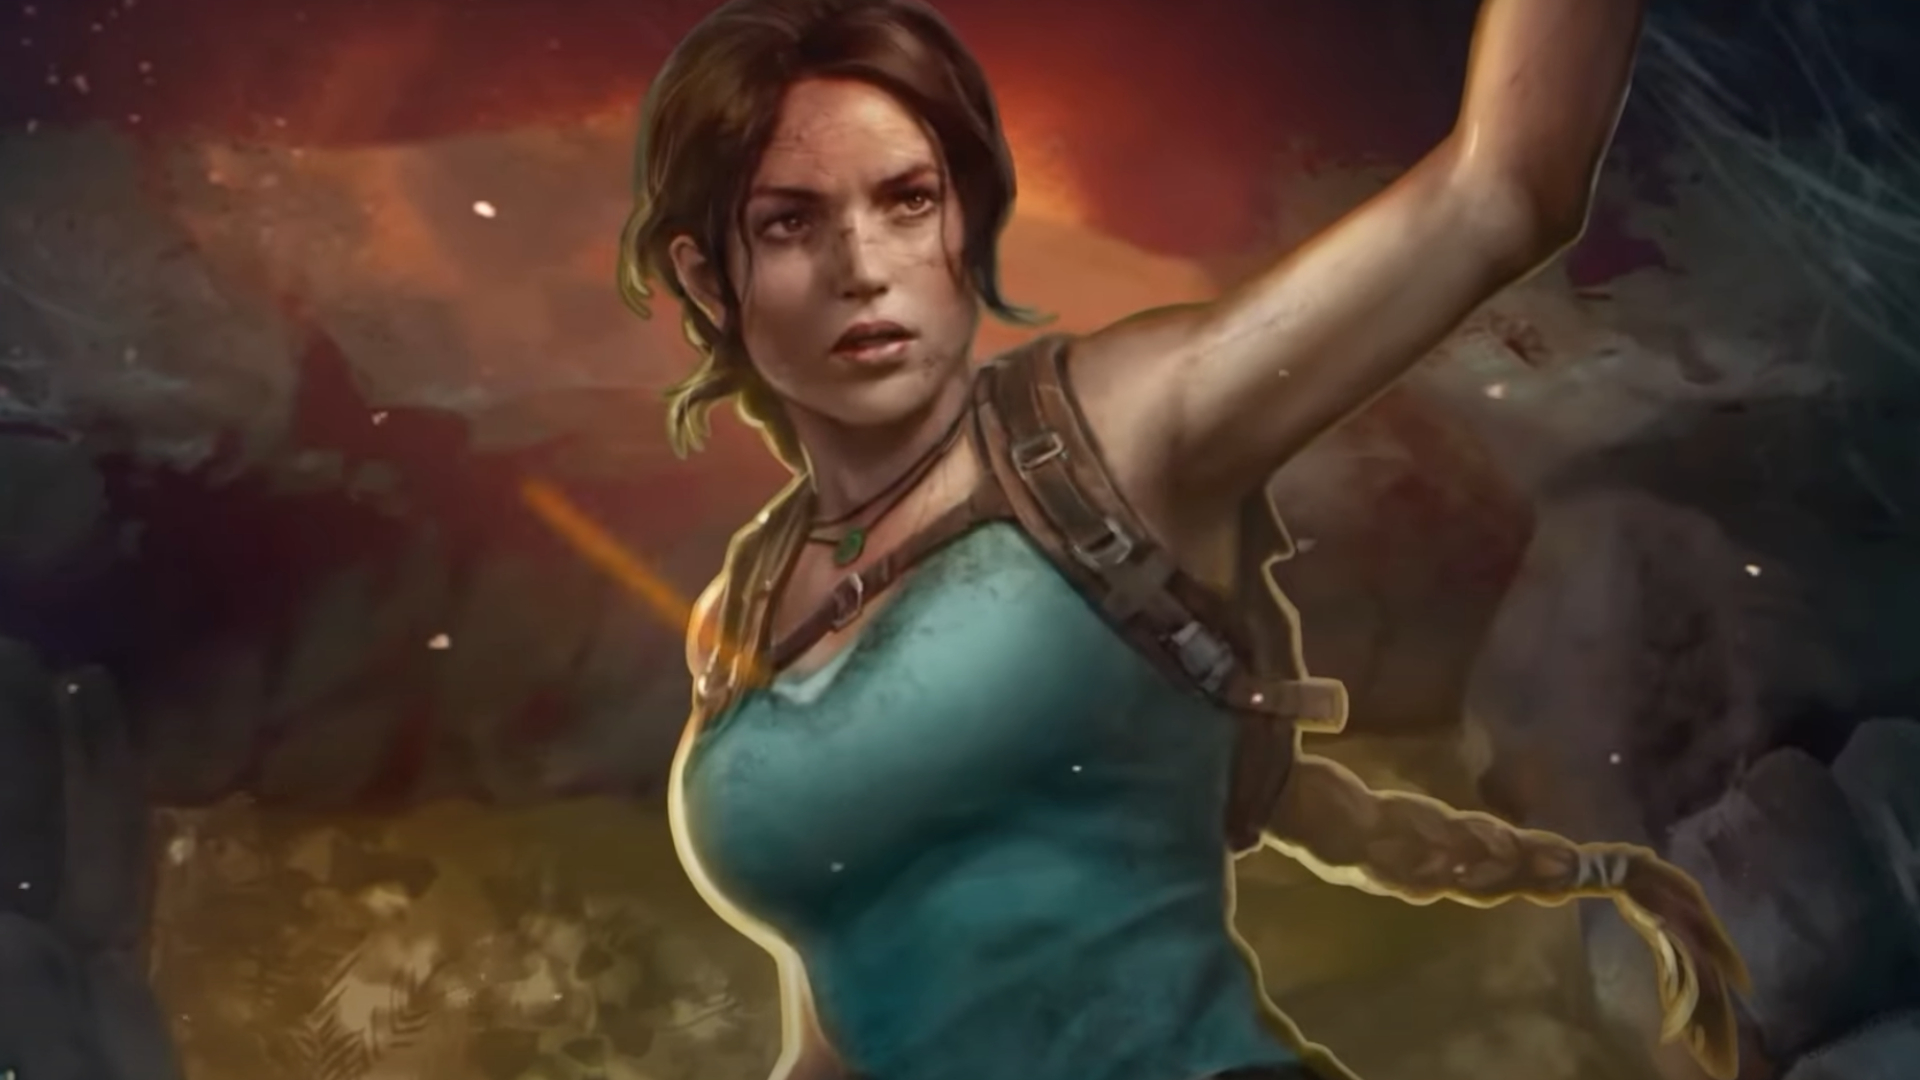 Tomb Raider joins Magic: the Gathering in surprise Secret Lair 